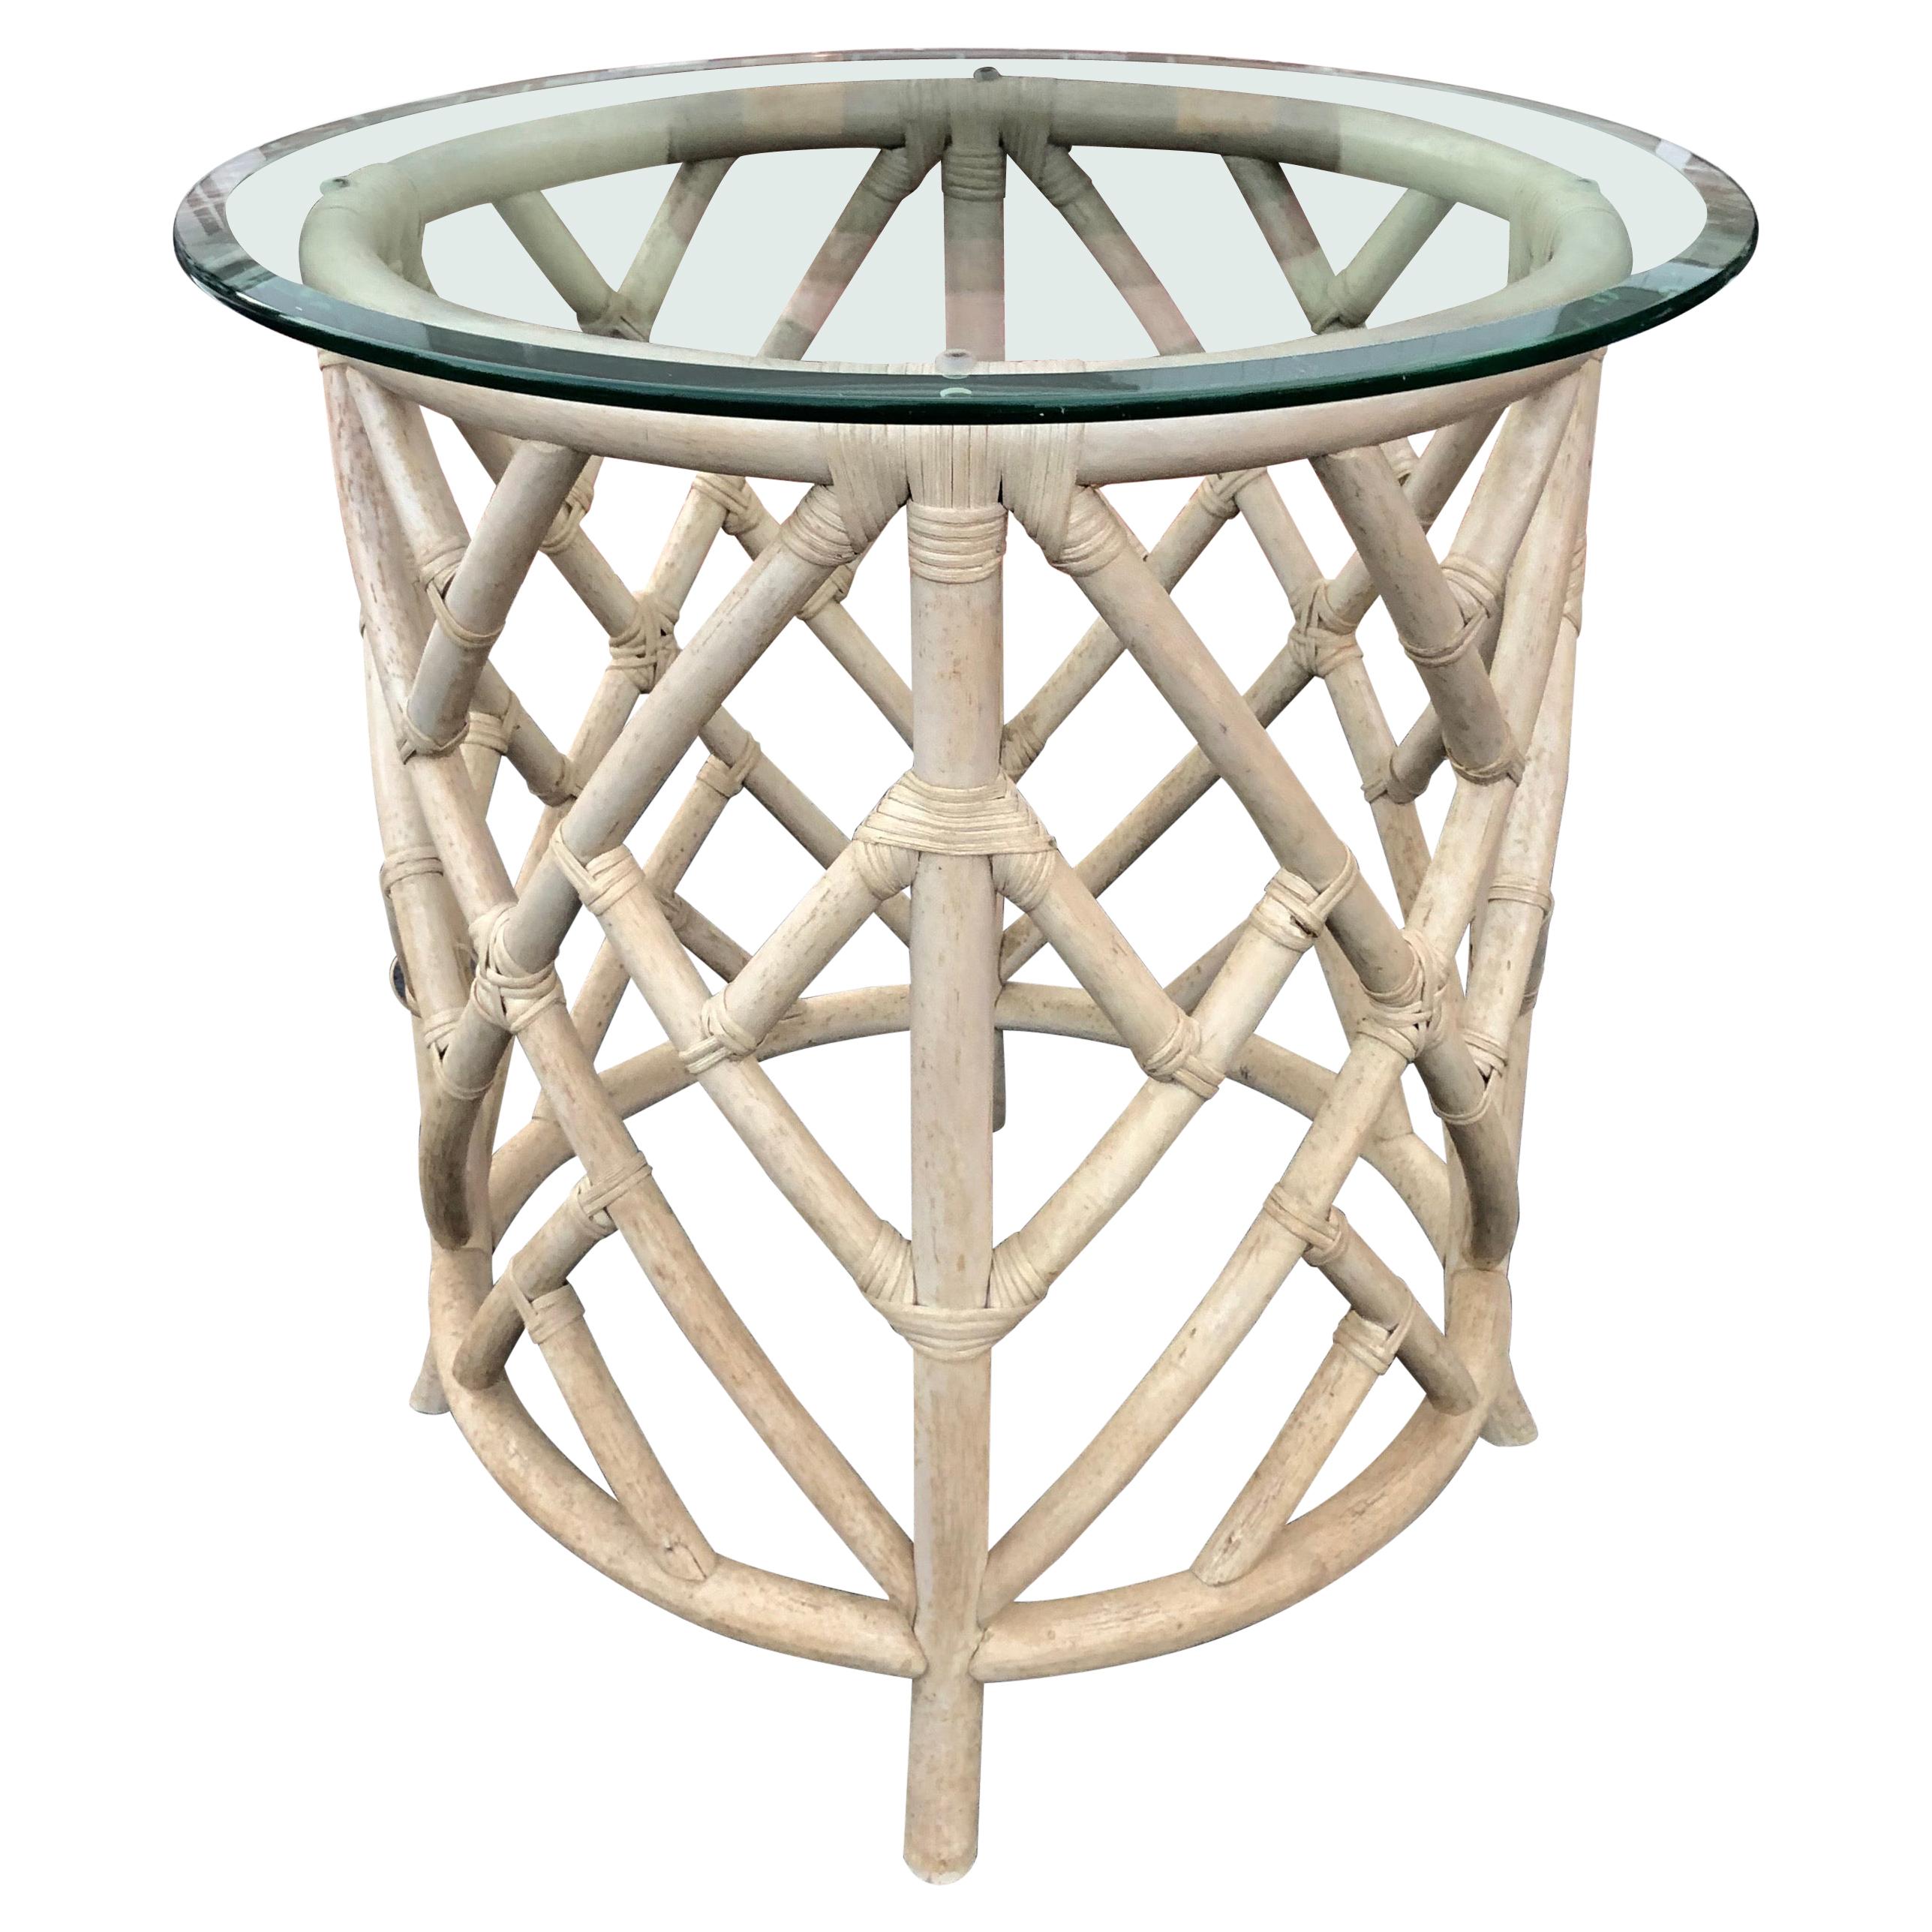 Boho Chic Chinoiserie Round Rattan Dining Table Base For Sale